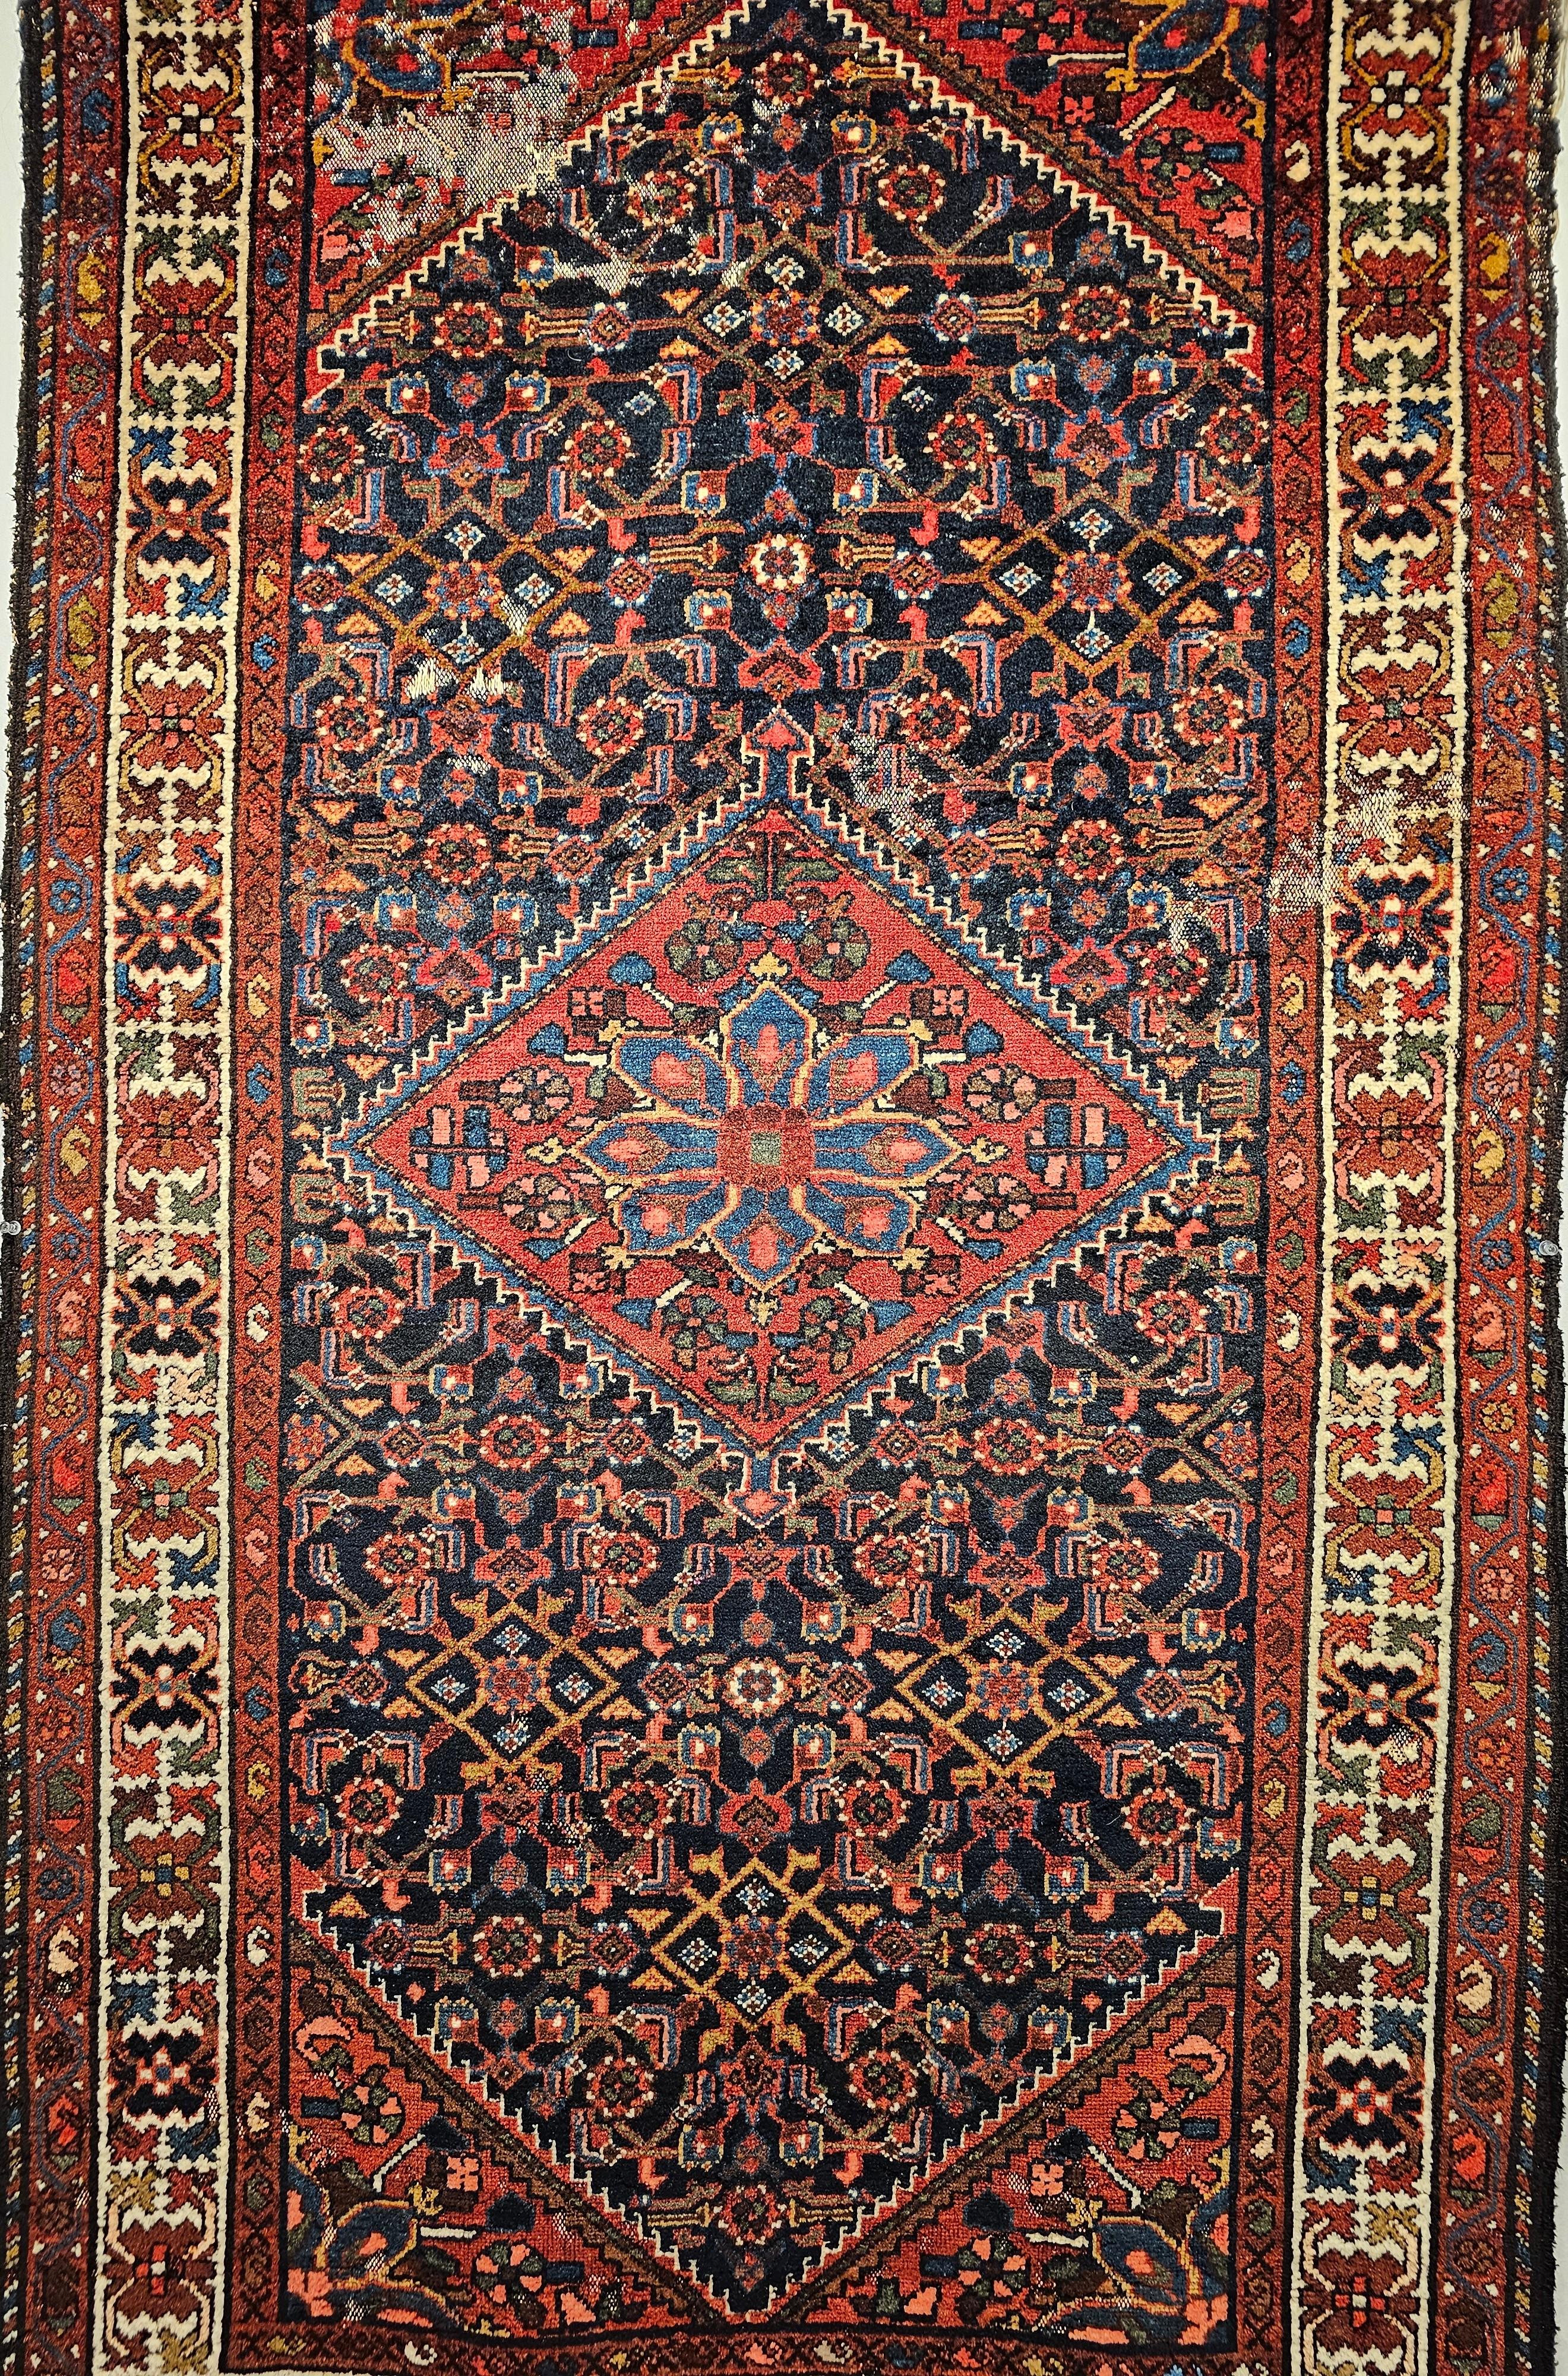 Vintage Persian Malayer area rug in an allover “Herati” design from the mid 1900s.  The Malayer rug is in a navy blue background with an ivory color border.  There is a small central medallion  in a brilliant red color background  with a geometric